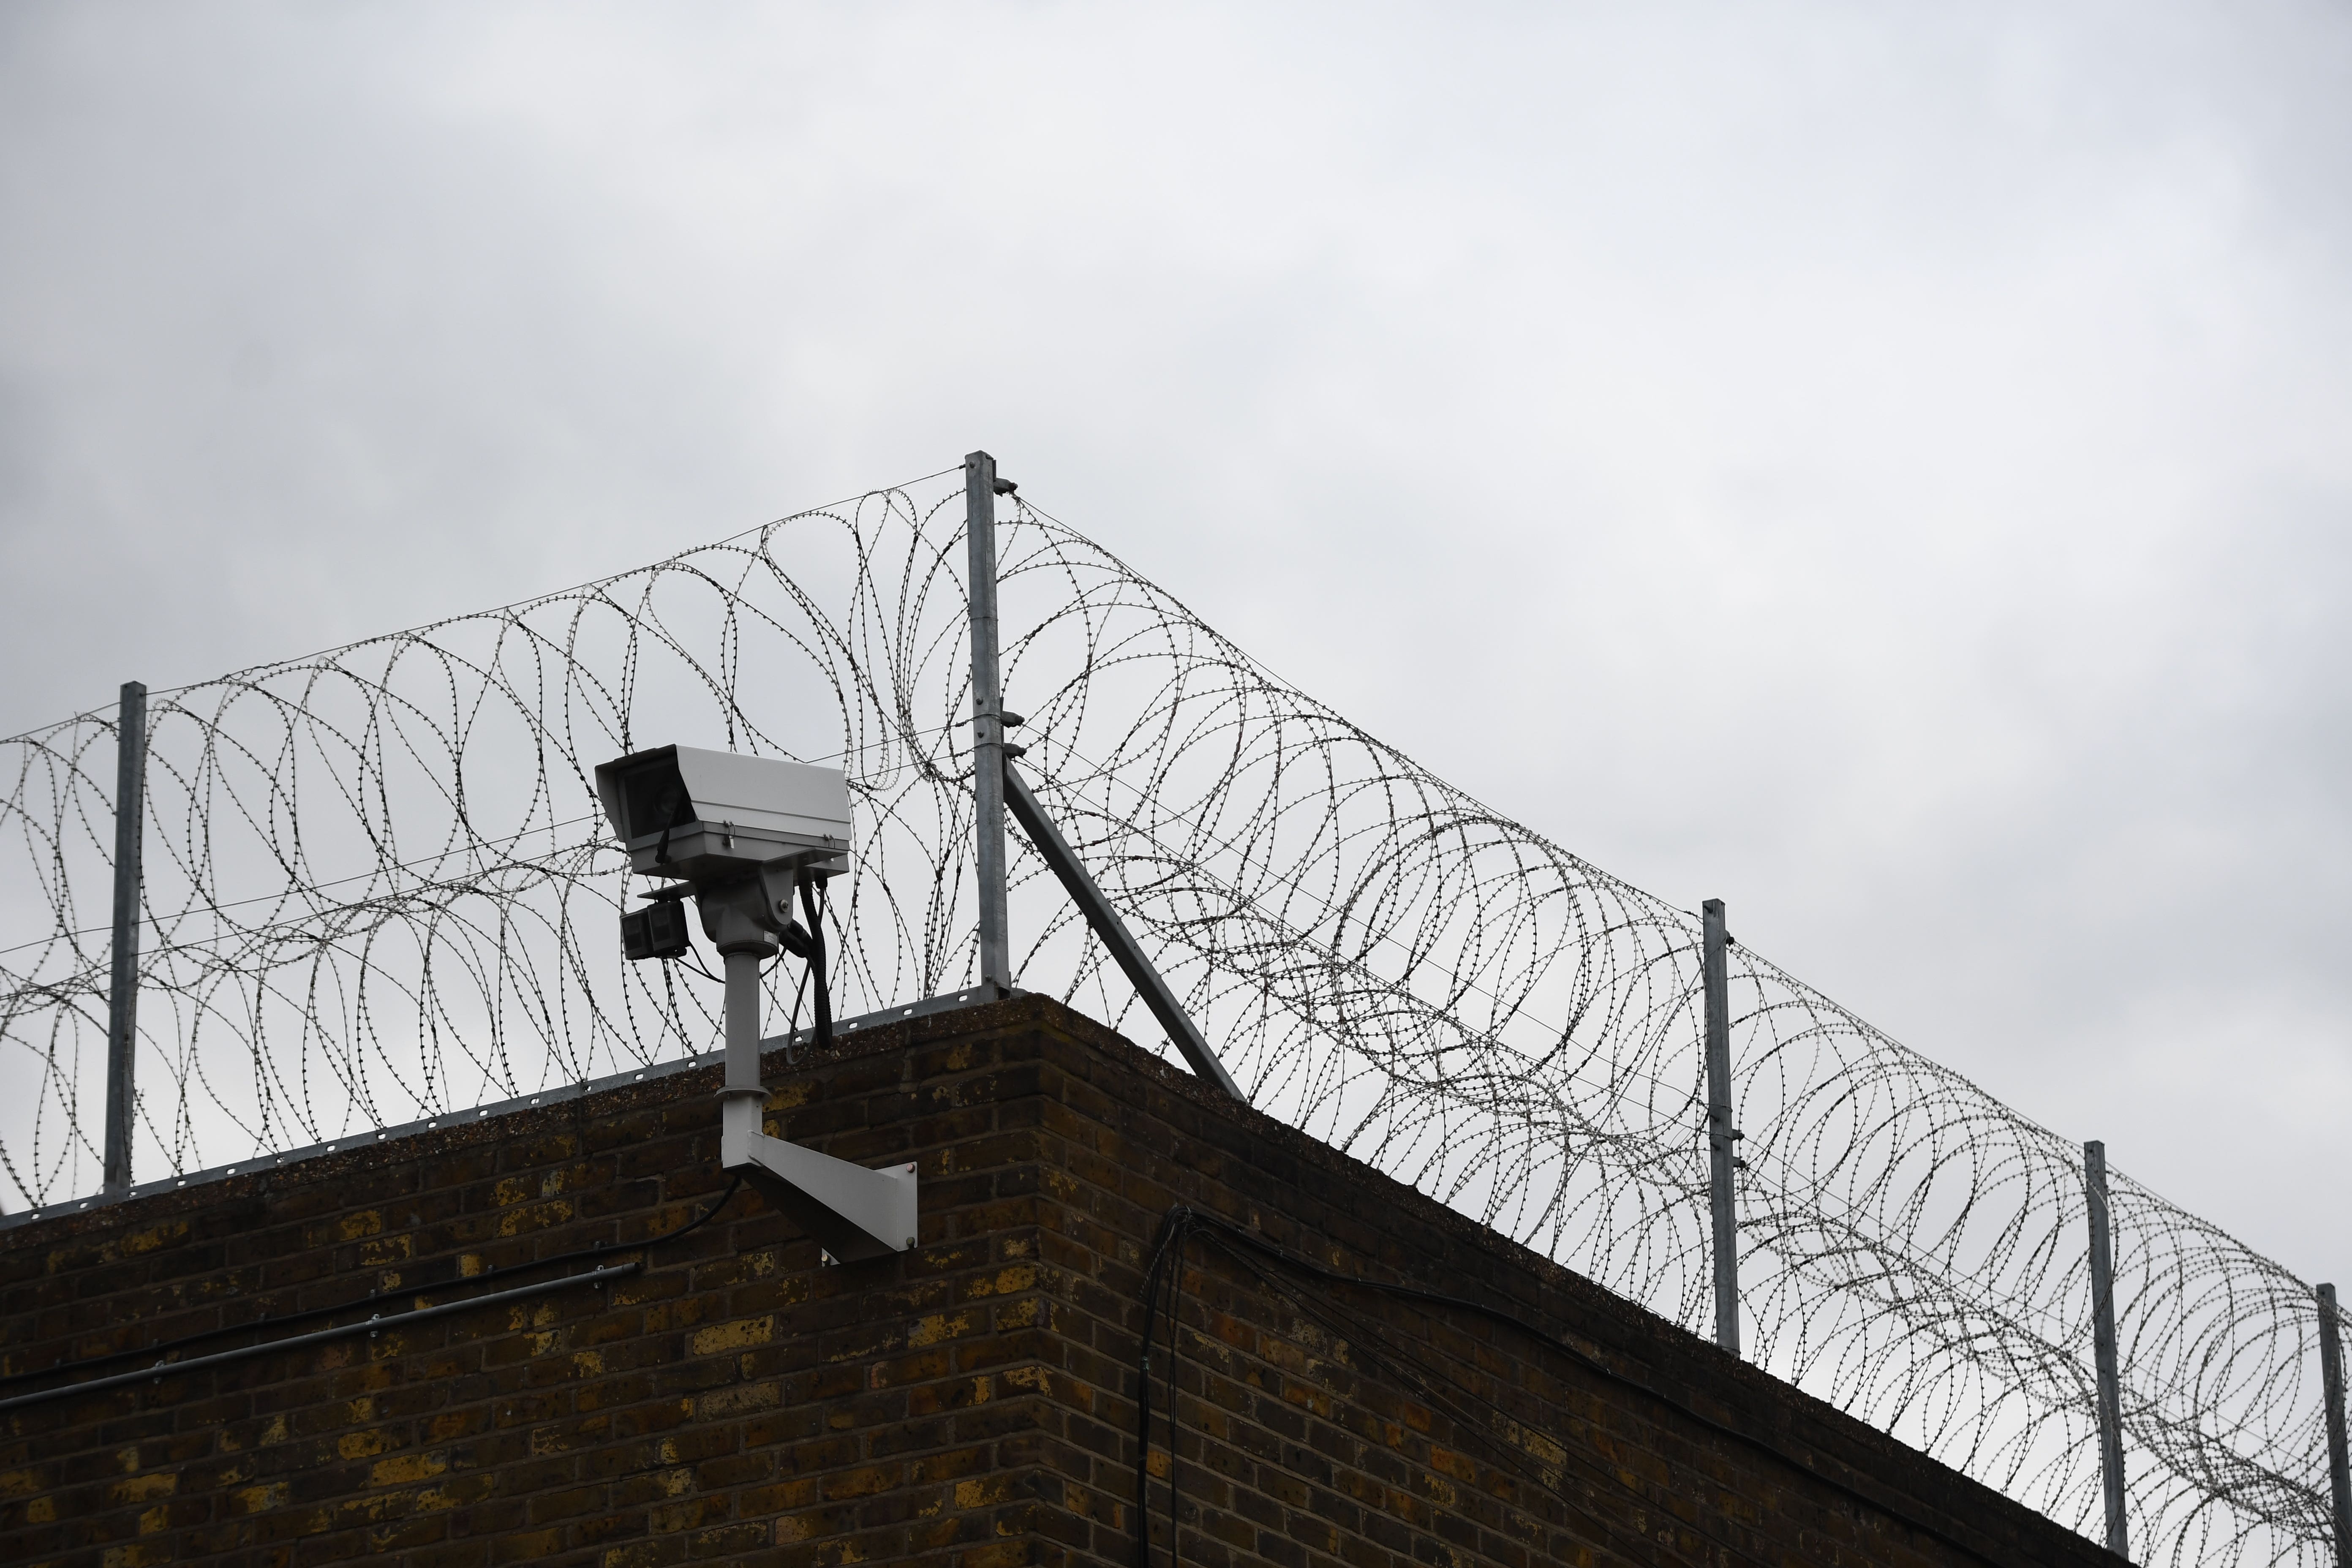 A drone filled with cannabis, Pregablin, the drug spice and phones, crashed into HMP Pentonville in August 2023